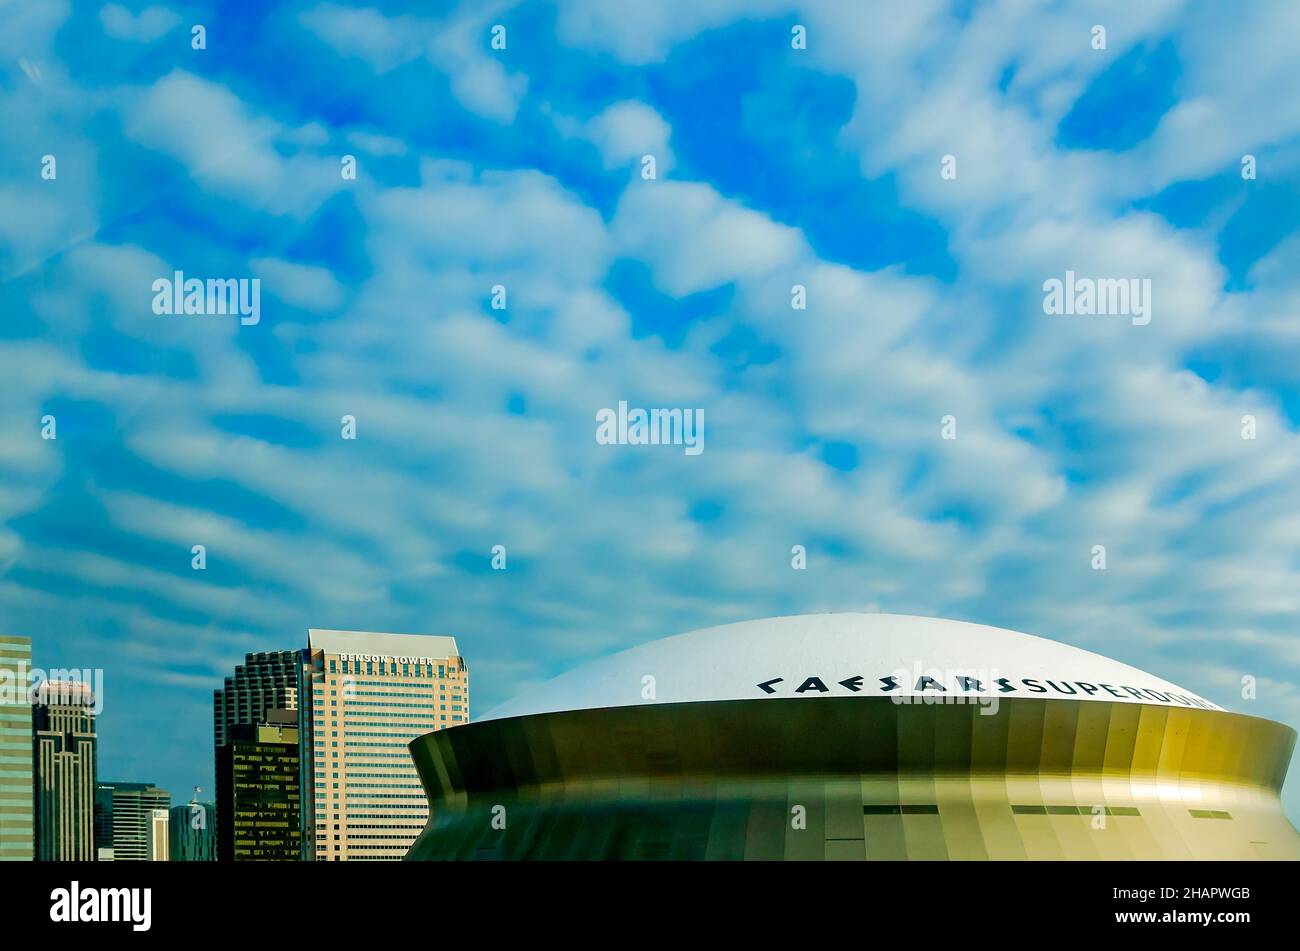 The Louisiana Superdome, now known as Caesars Superdome, is pictured, Dec. 13, 2021, in New Orleans, Louisiana. Stock Photo